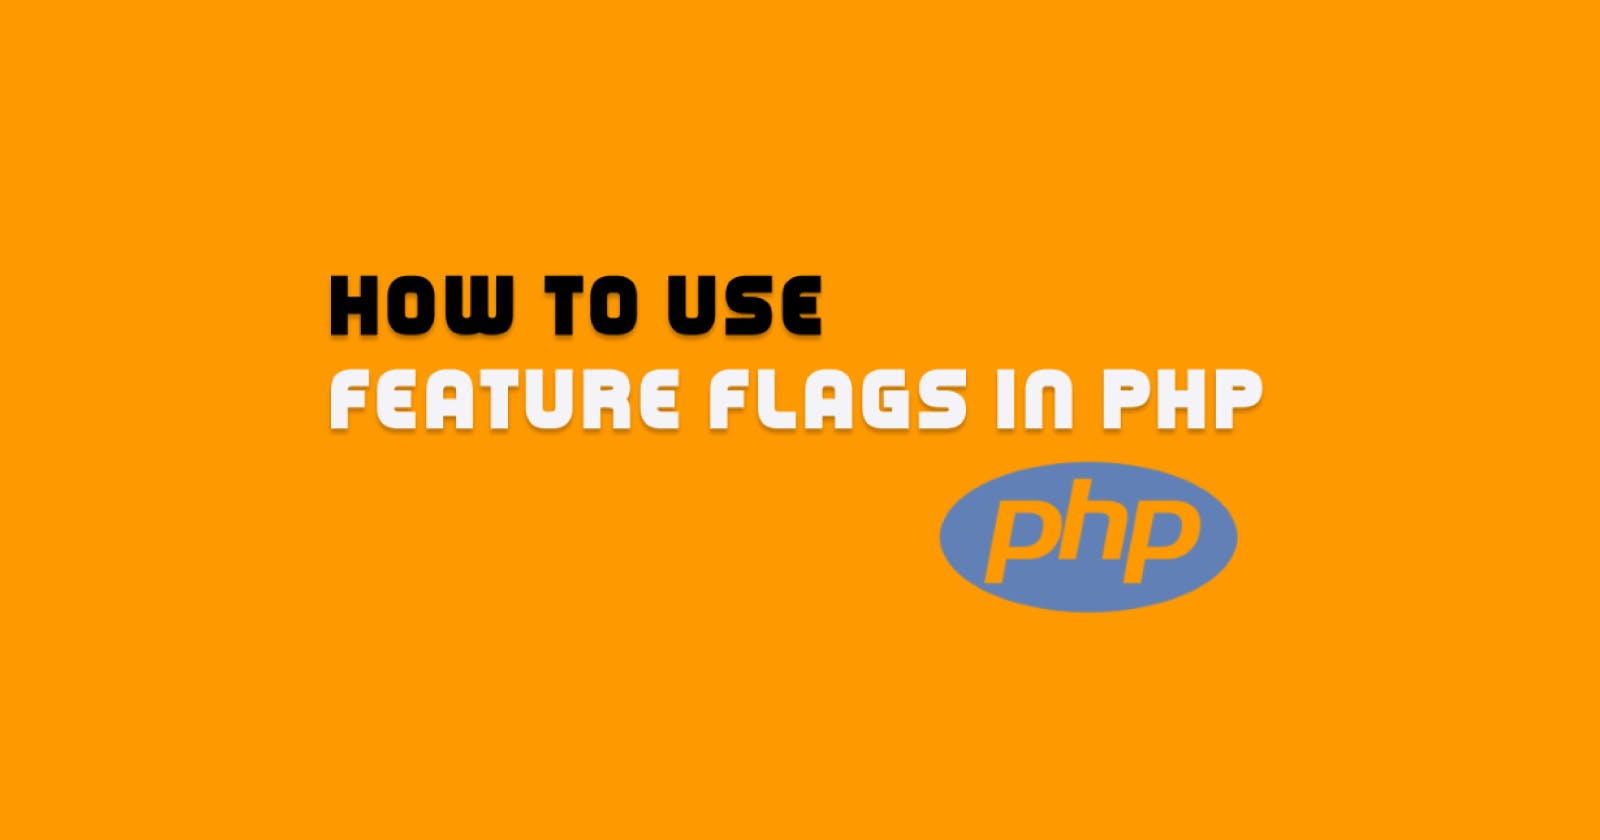 How to use feature flags in a PHP application